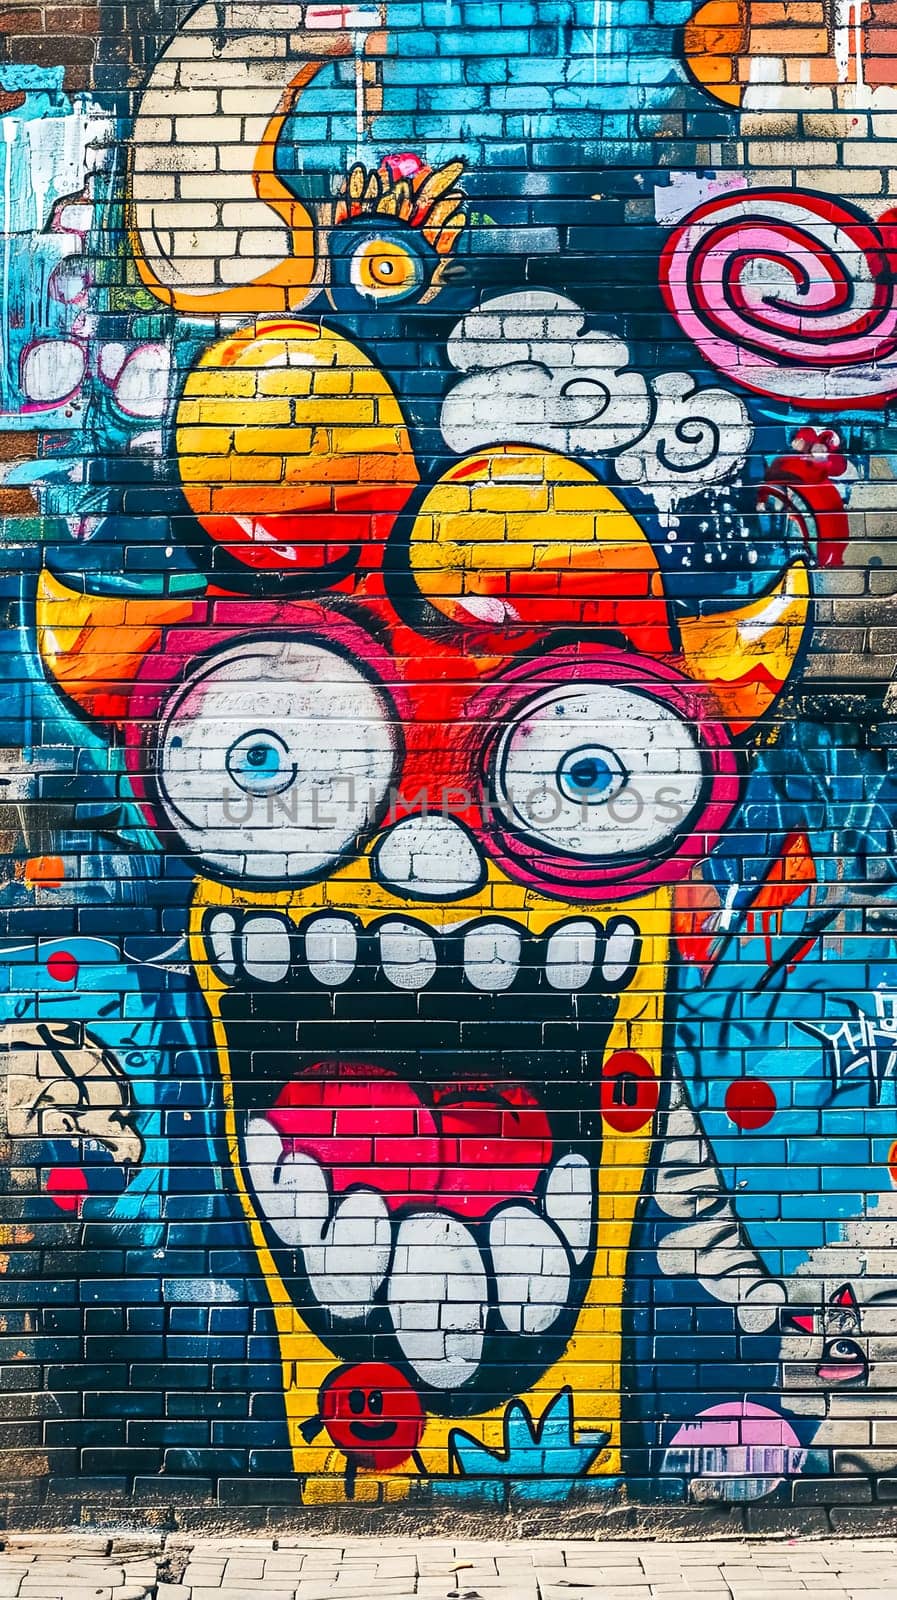 graffiti piece on a brick wall featuring an eccentric character with large, round eyes and a whimsical expression by Edophoto